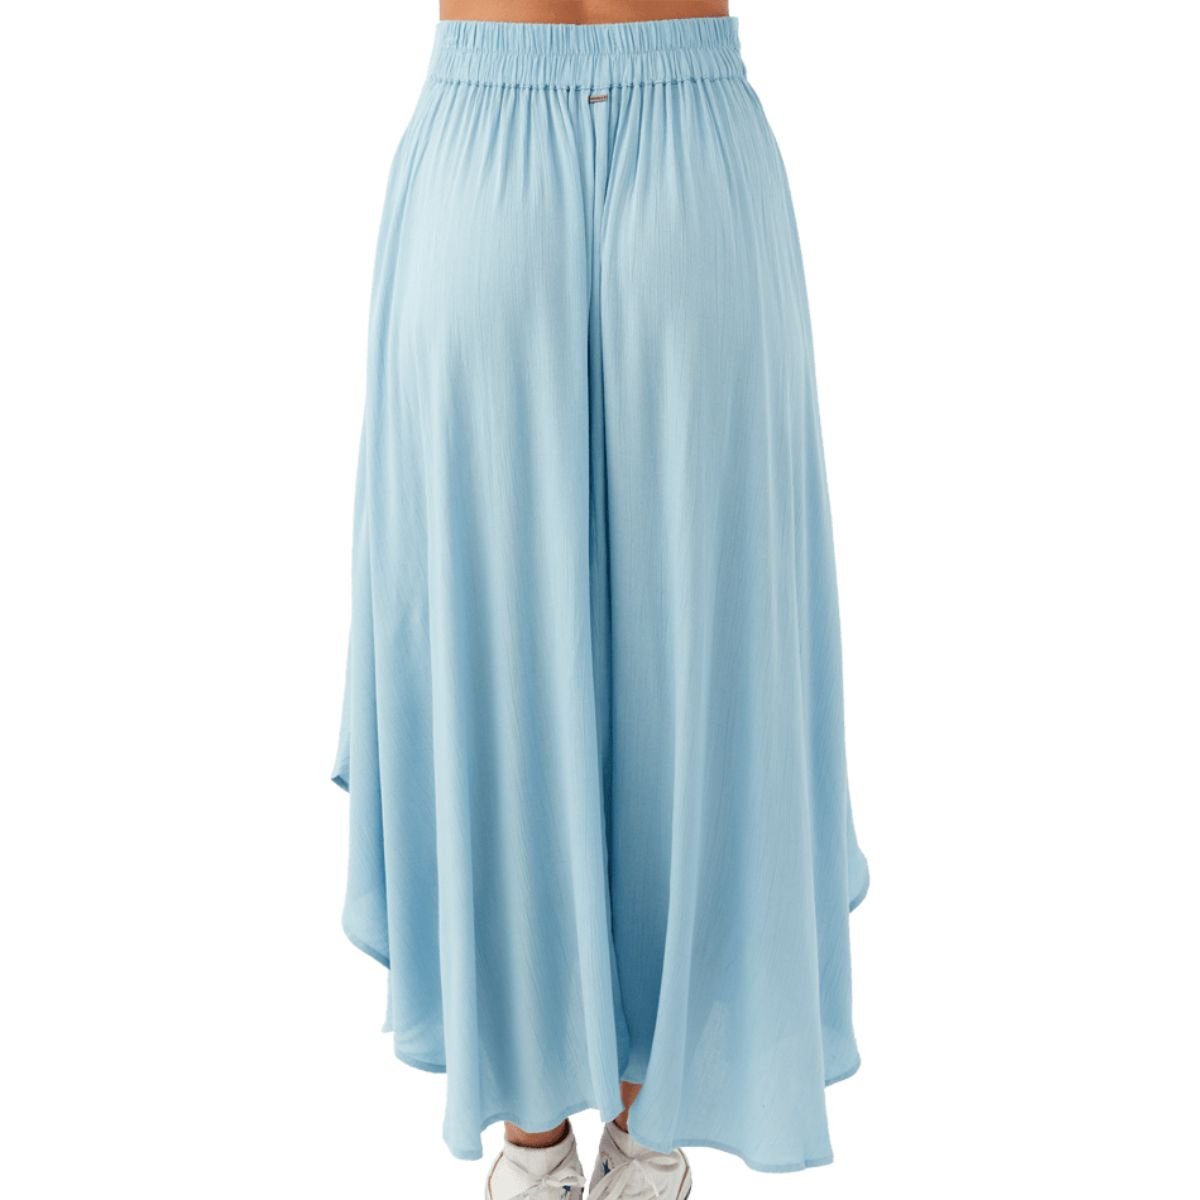 O'Neill Marnie Skirt in Chambray - BoardCo